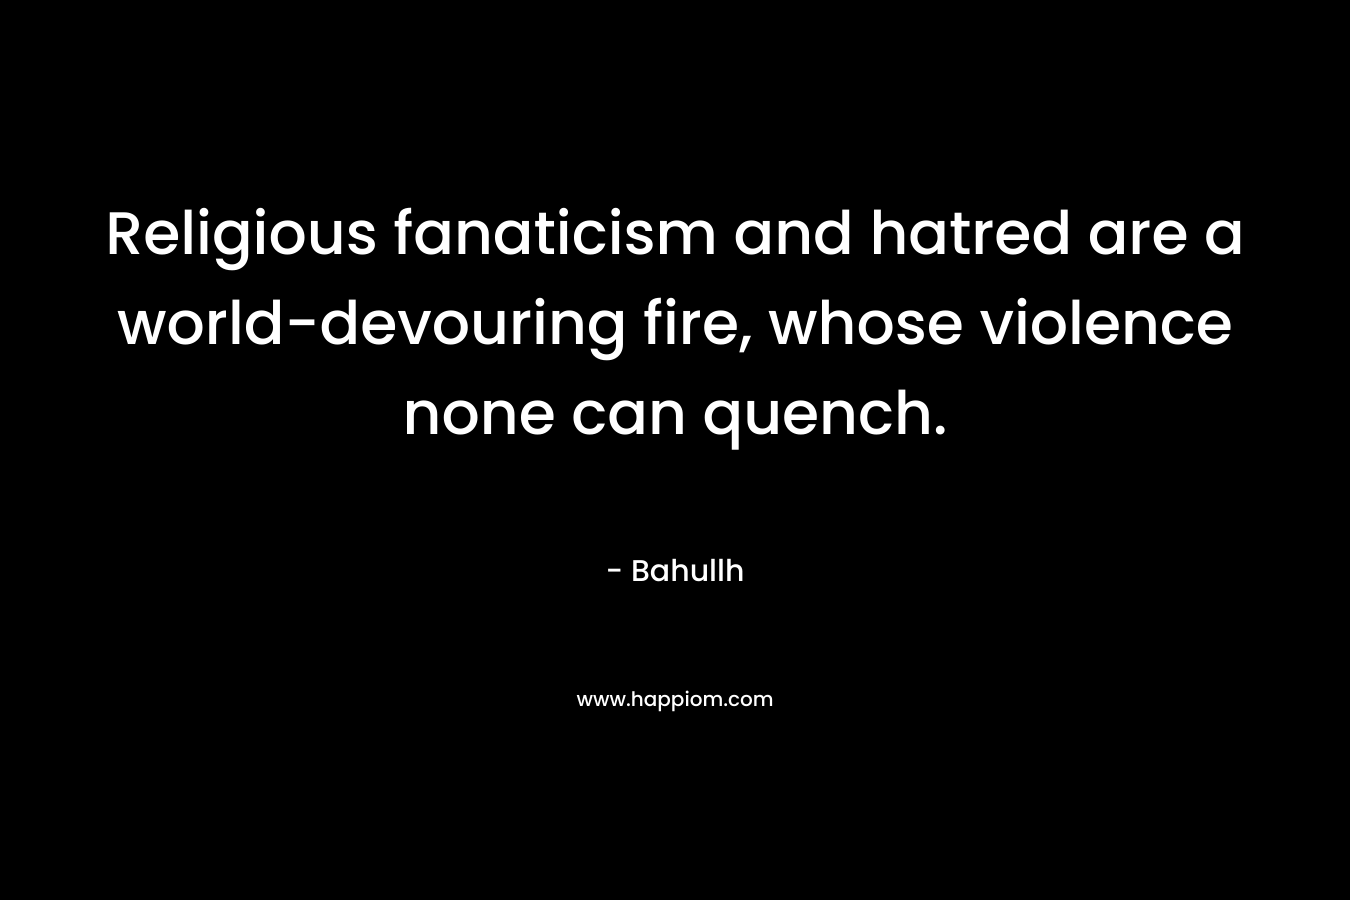 Religious fanaticism and hatred are a world-devouring fire, whose violence none can quench. – Bahullh